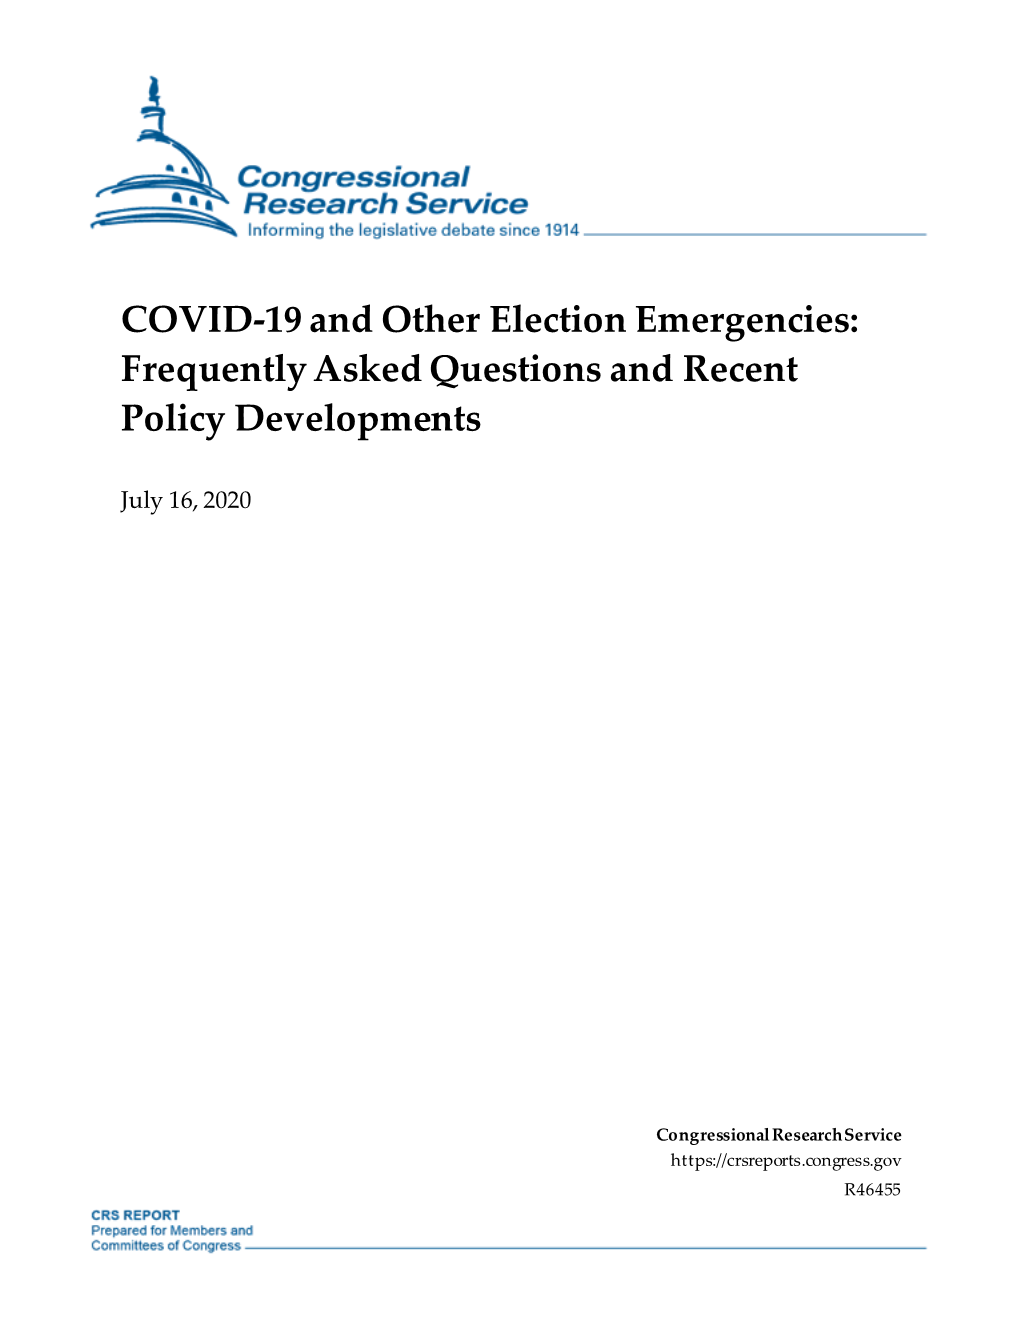 COVID-19 and Other Election Emergencies: Frequently Asked Questions and Recent Policy Developments